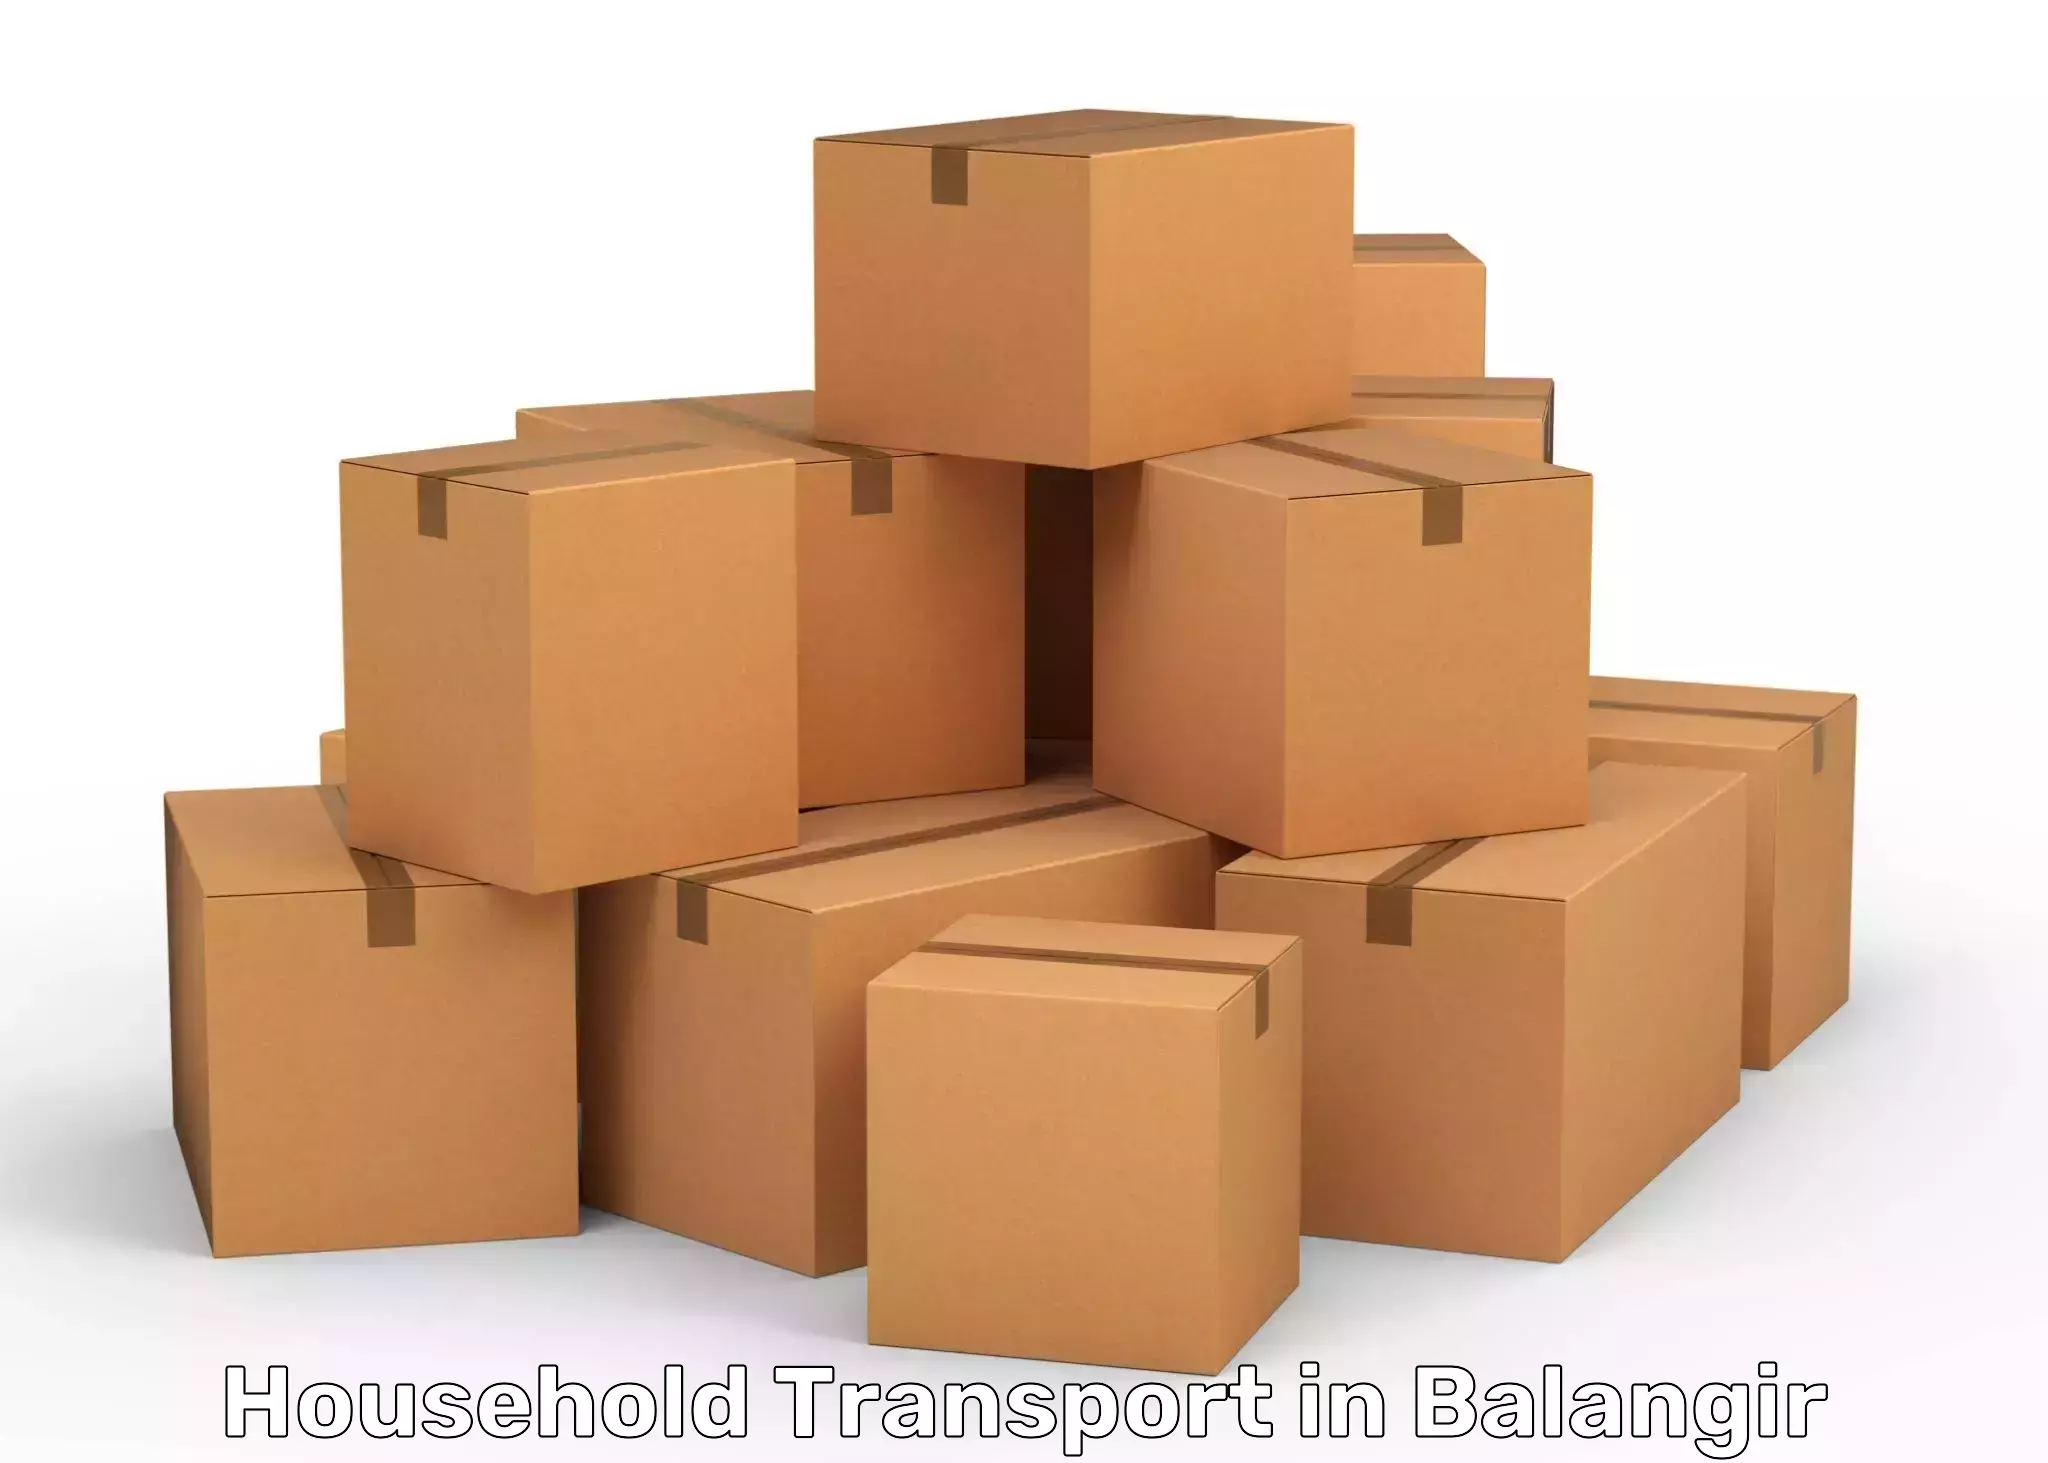 Hassle-free relocation in Balangir